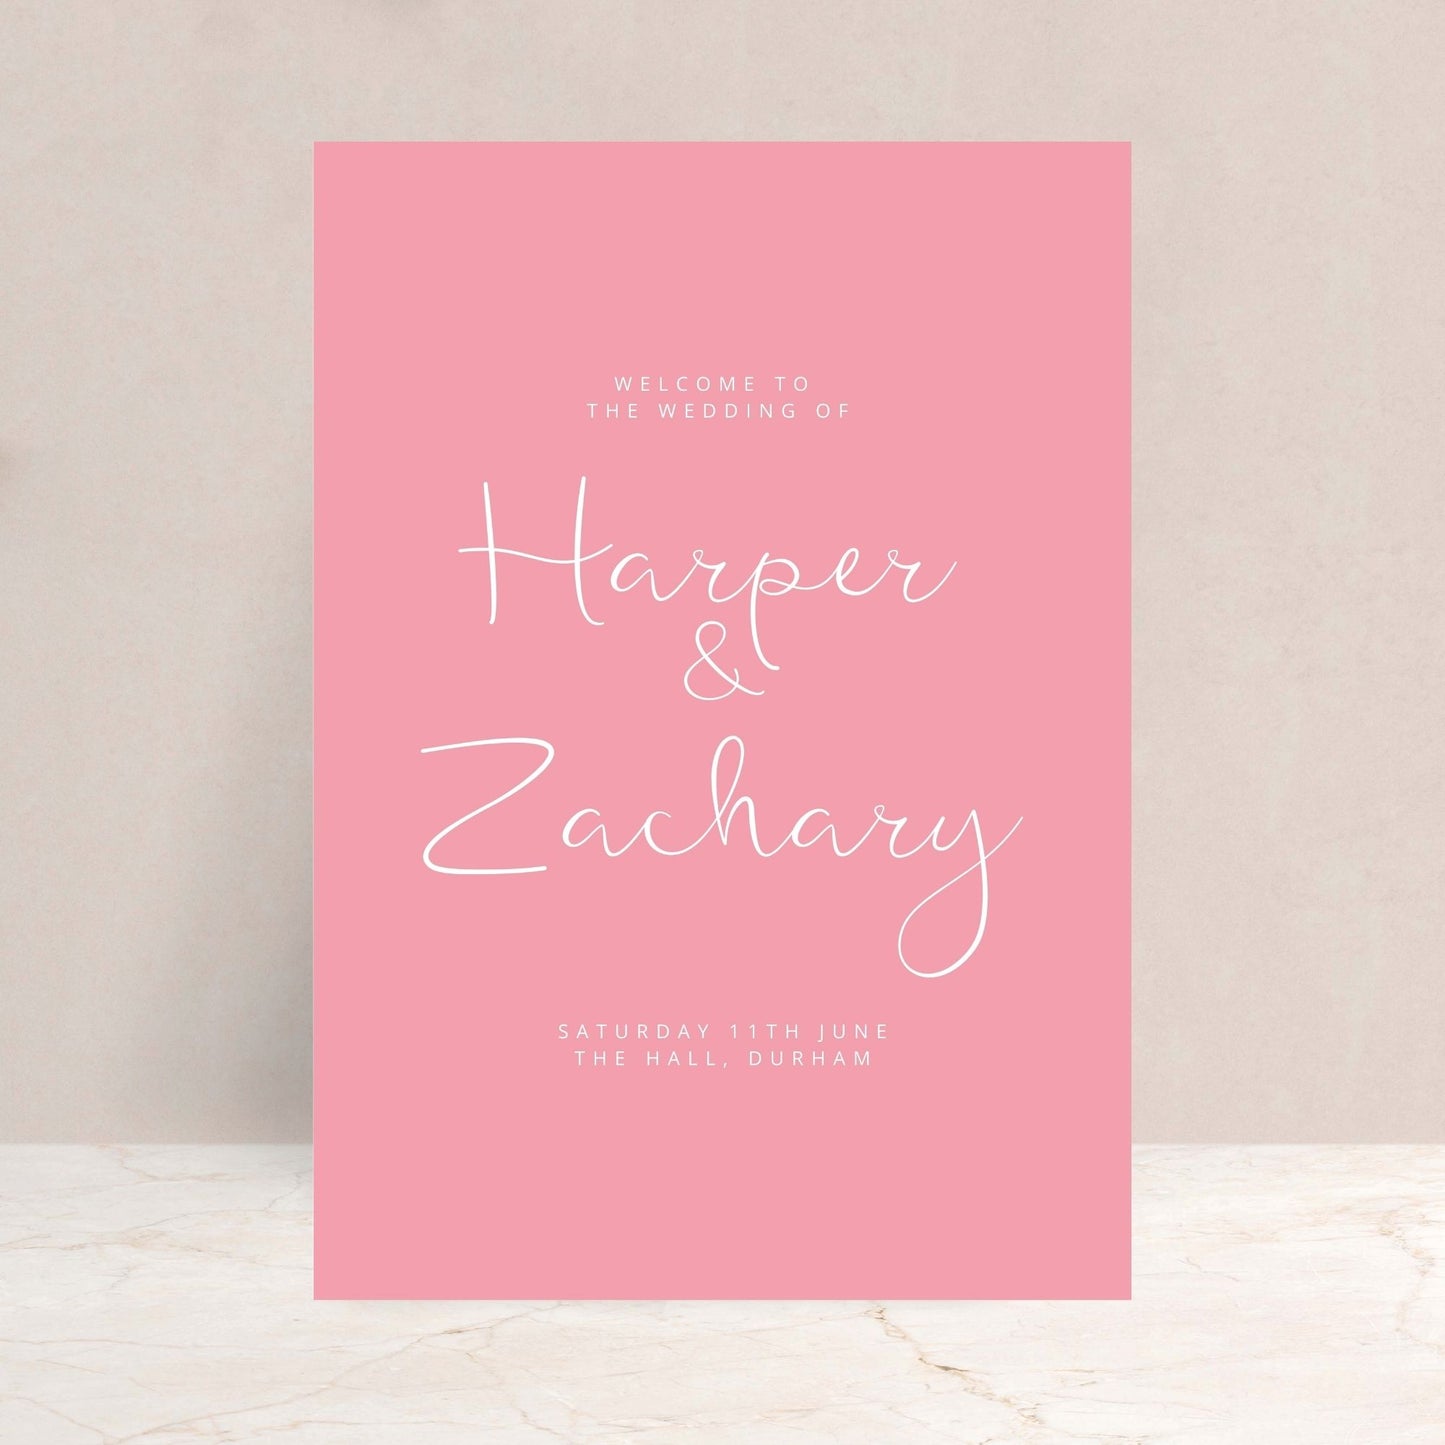 HARPER Wedding Welcome Sign - Wedding Ceremony Stationery available at The Ivy Collection | Luxury Wedding Stationery